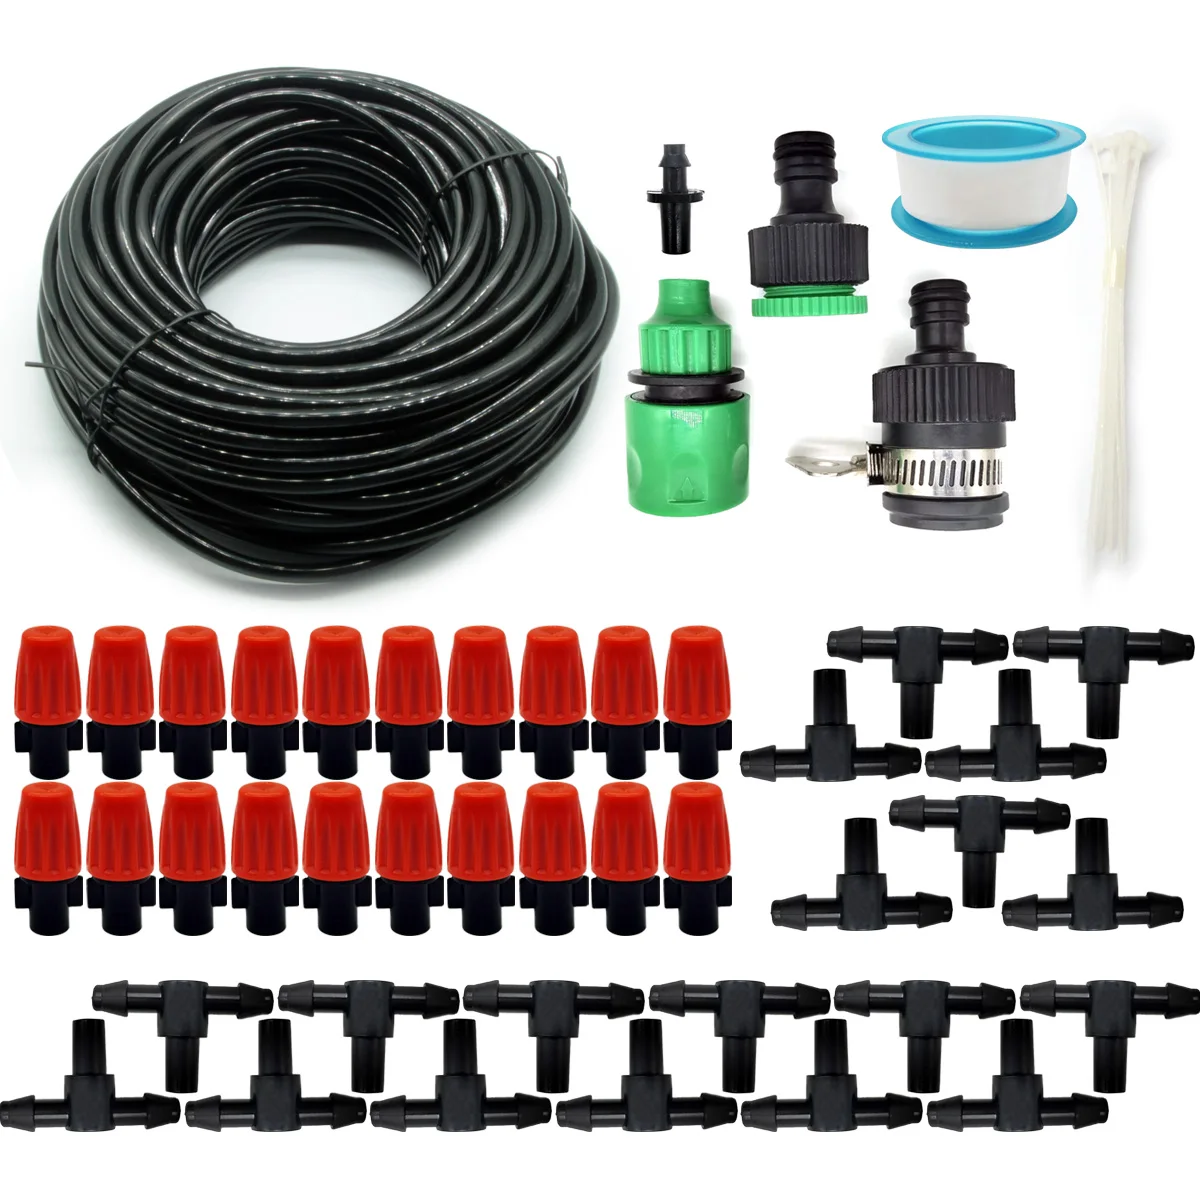 

Adjustable Automatic Micro Drip irrigation system diy kits for Garden Greenhouse Flower Bed and Patio, Black